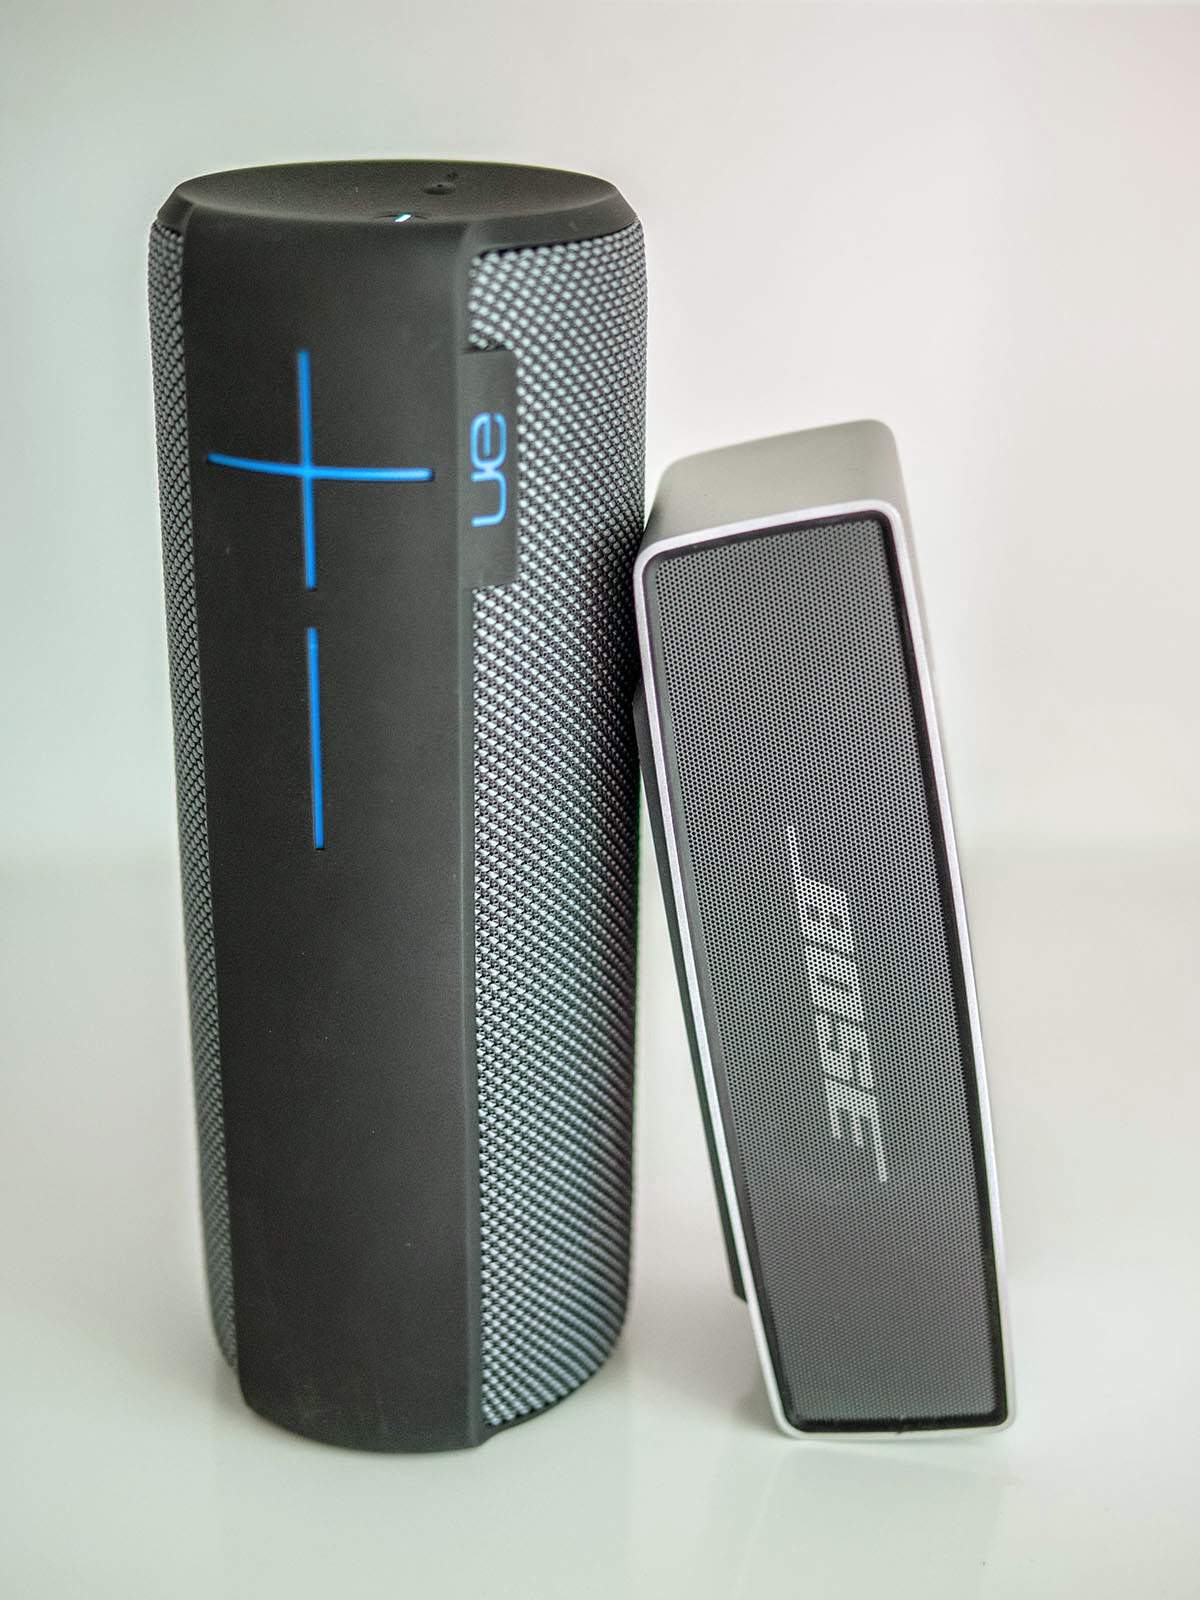 Oluv's Gadgets: UE - too much boom be